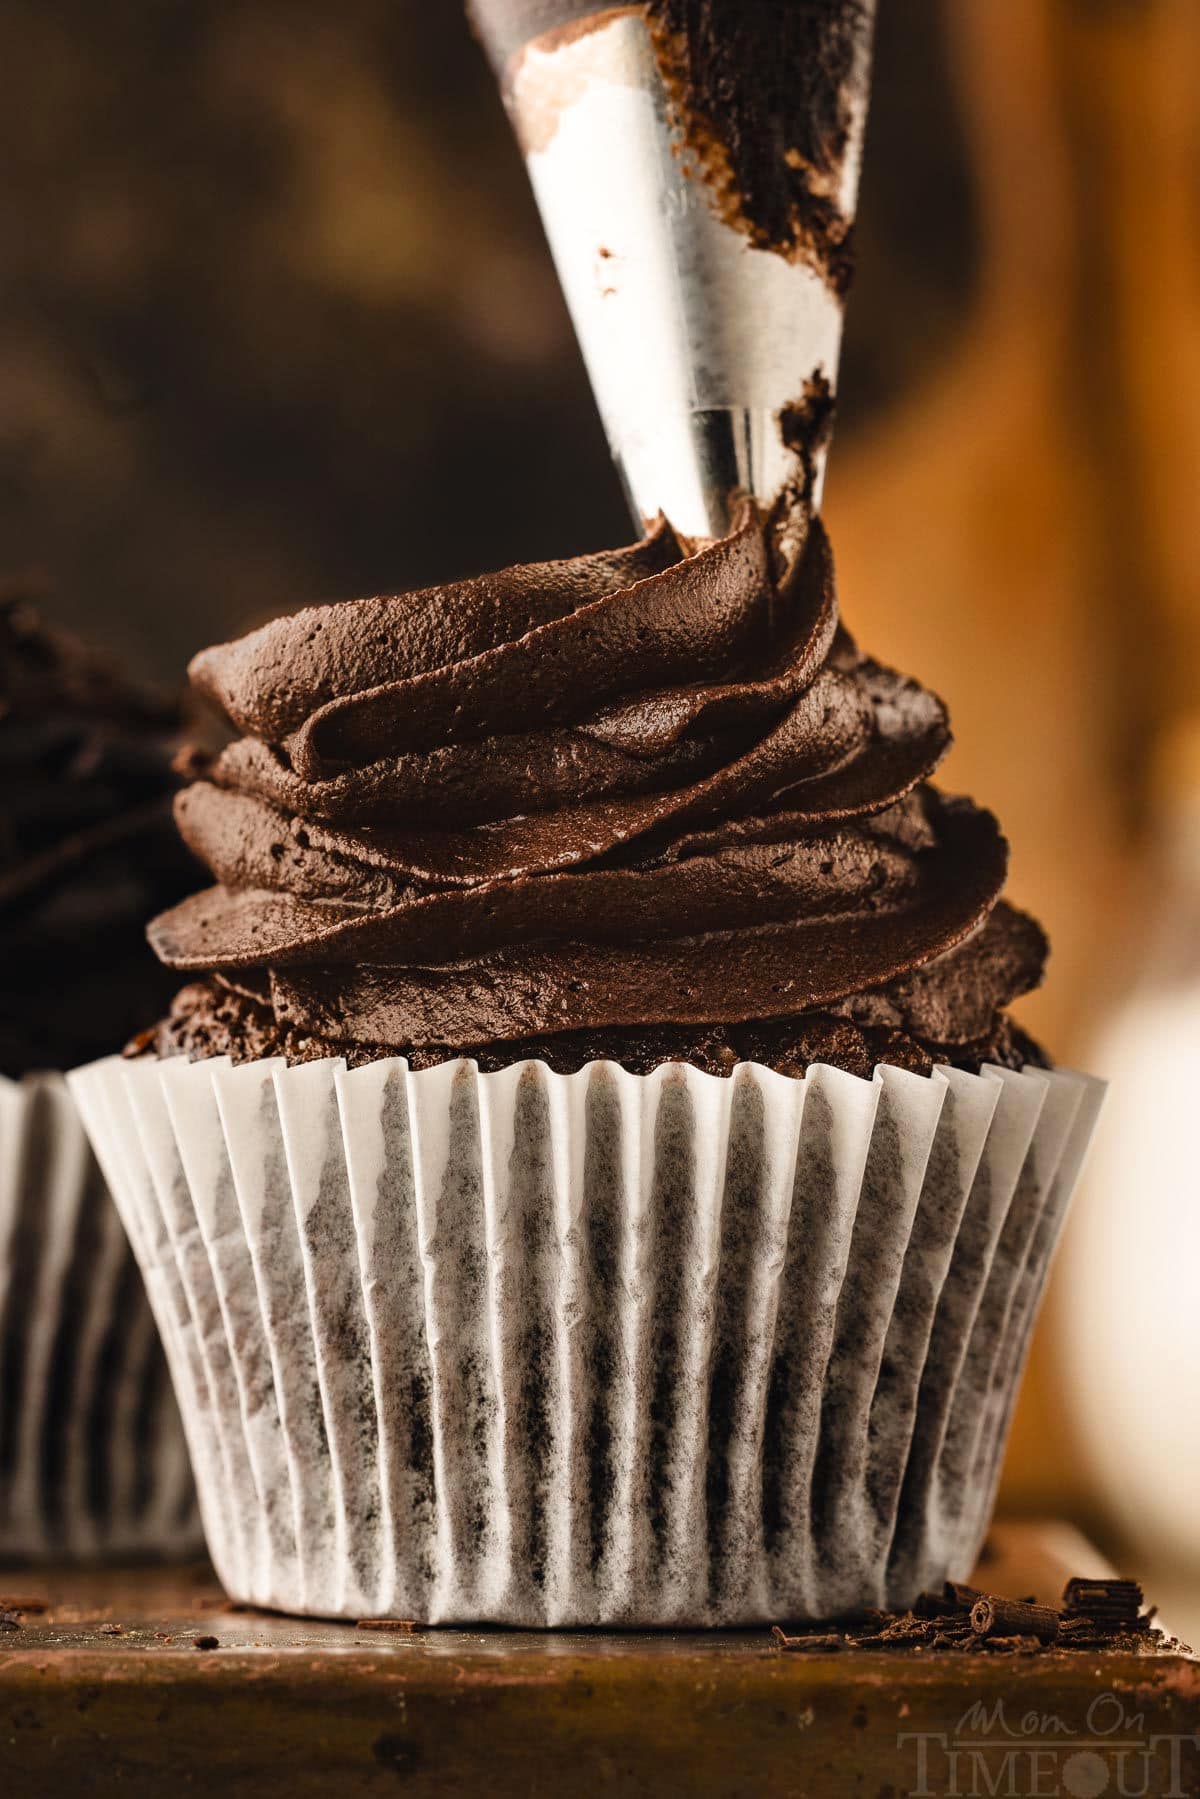 chocolate buttercream being piped onto a chocolate cupcake sitting on a dark metal surface.